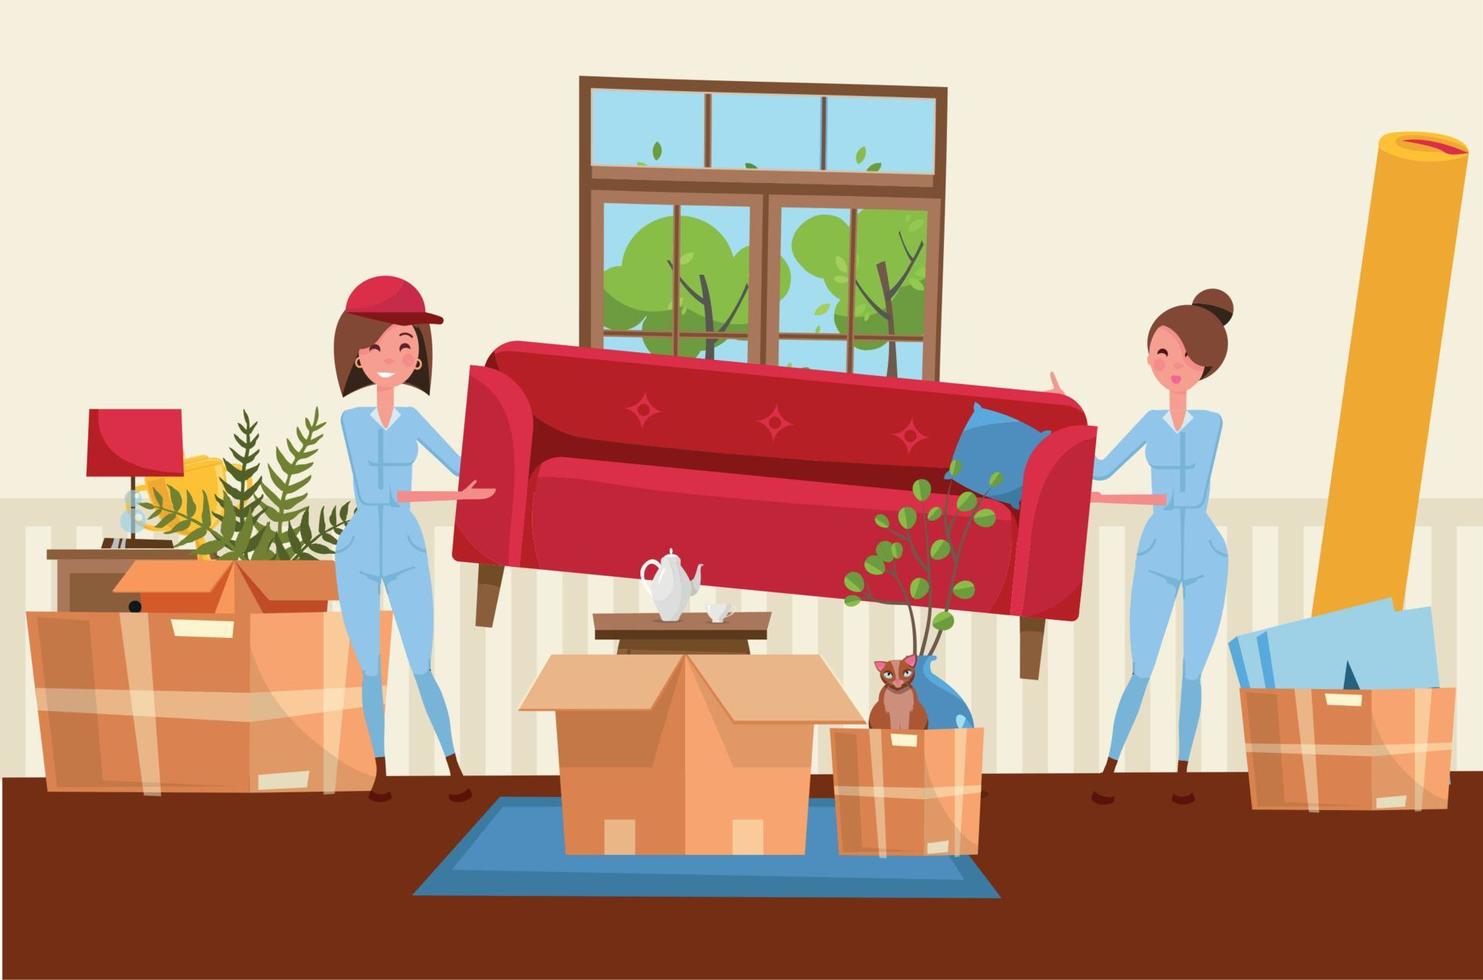 Two women workers are carrying a red sofa. Moving boxes in new house. House living room interior. Pile of stacked cardboard boxes with furniture, carpet, plants, cat. Vector flat cartoon illustration